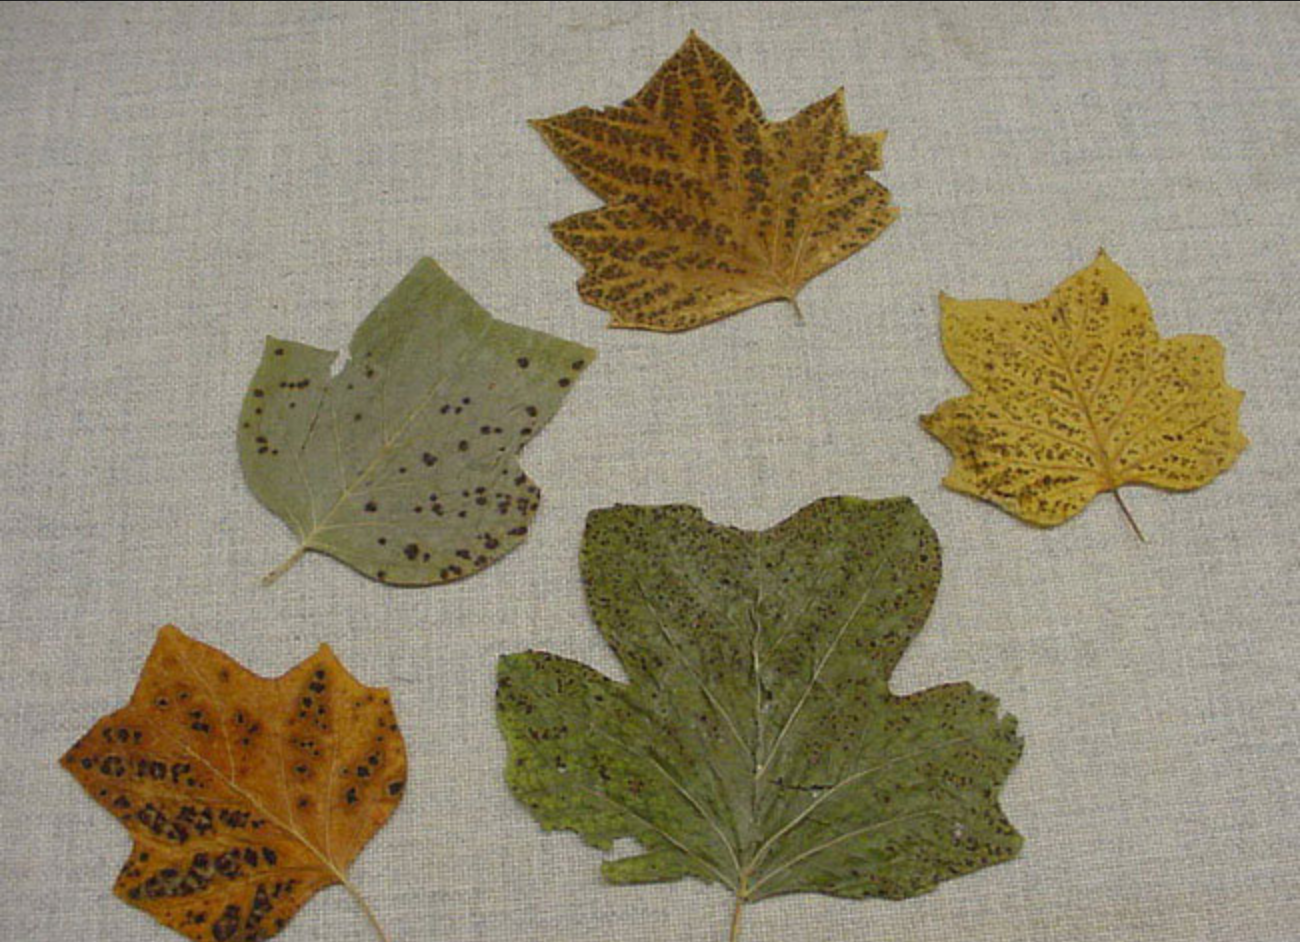 Tulip tree leaves with a leaf spot